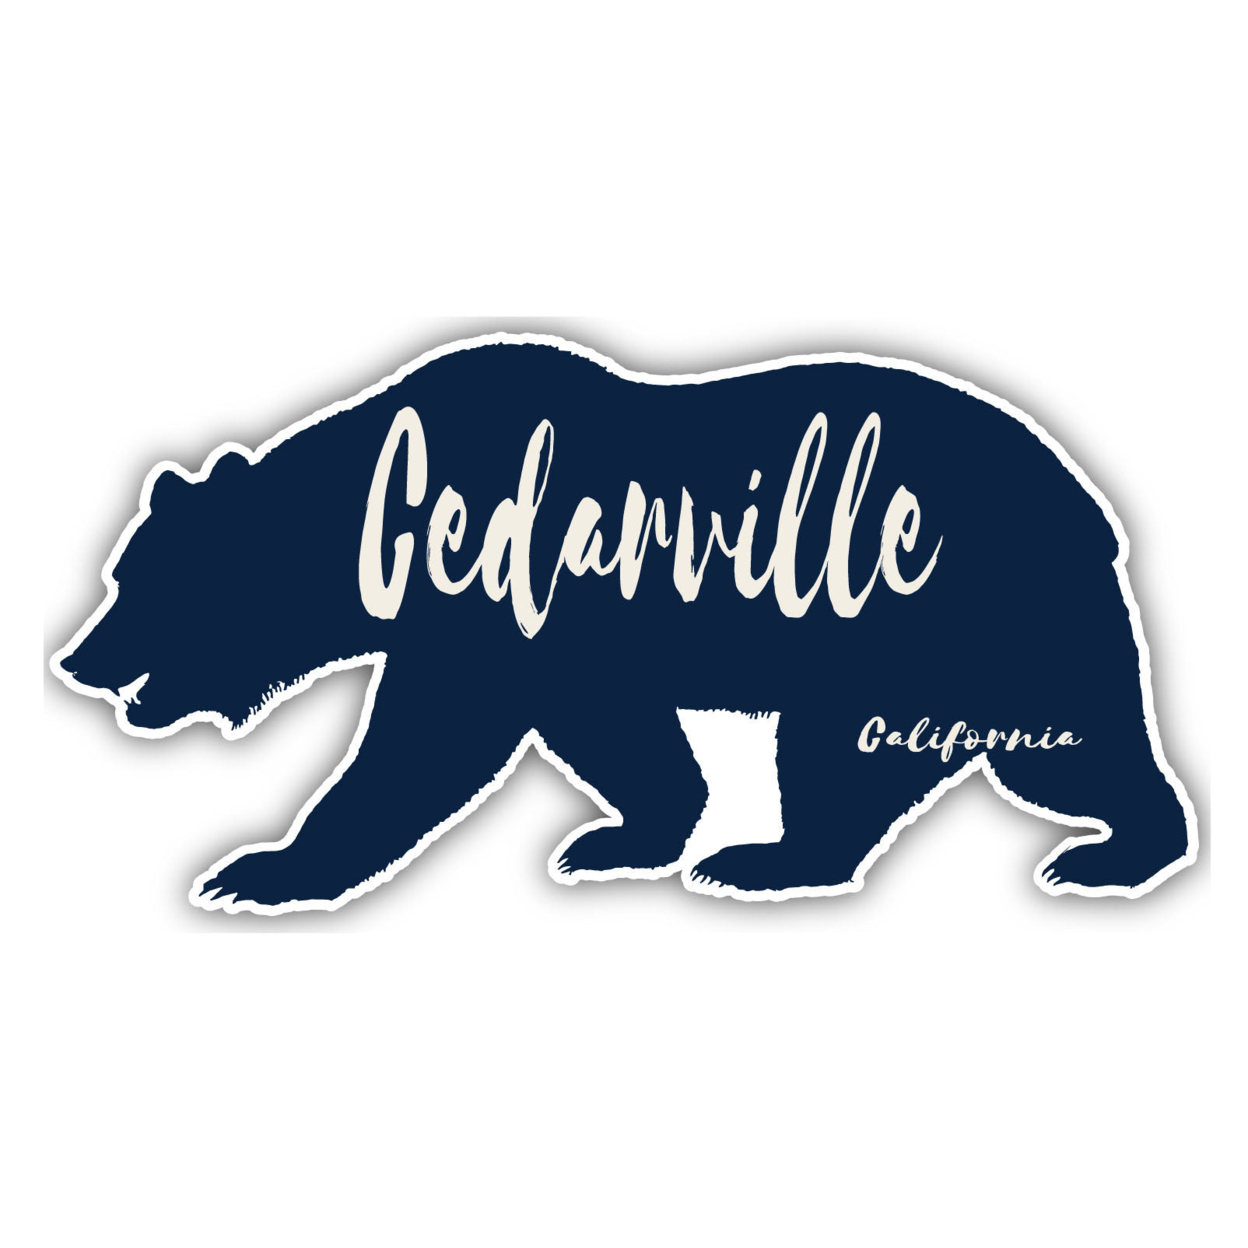 Cedarville California Souvenir Decorative Stickers (Choose Theme And Size) - 4-Pack, 10-Inch, Bear